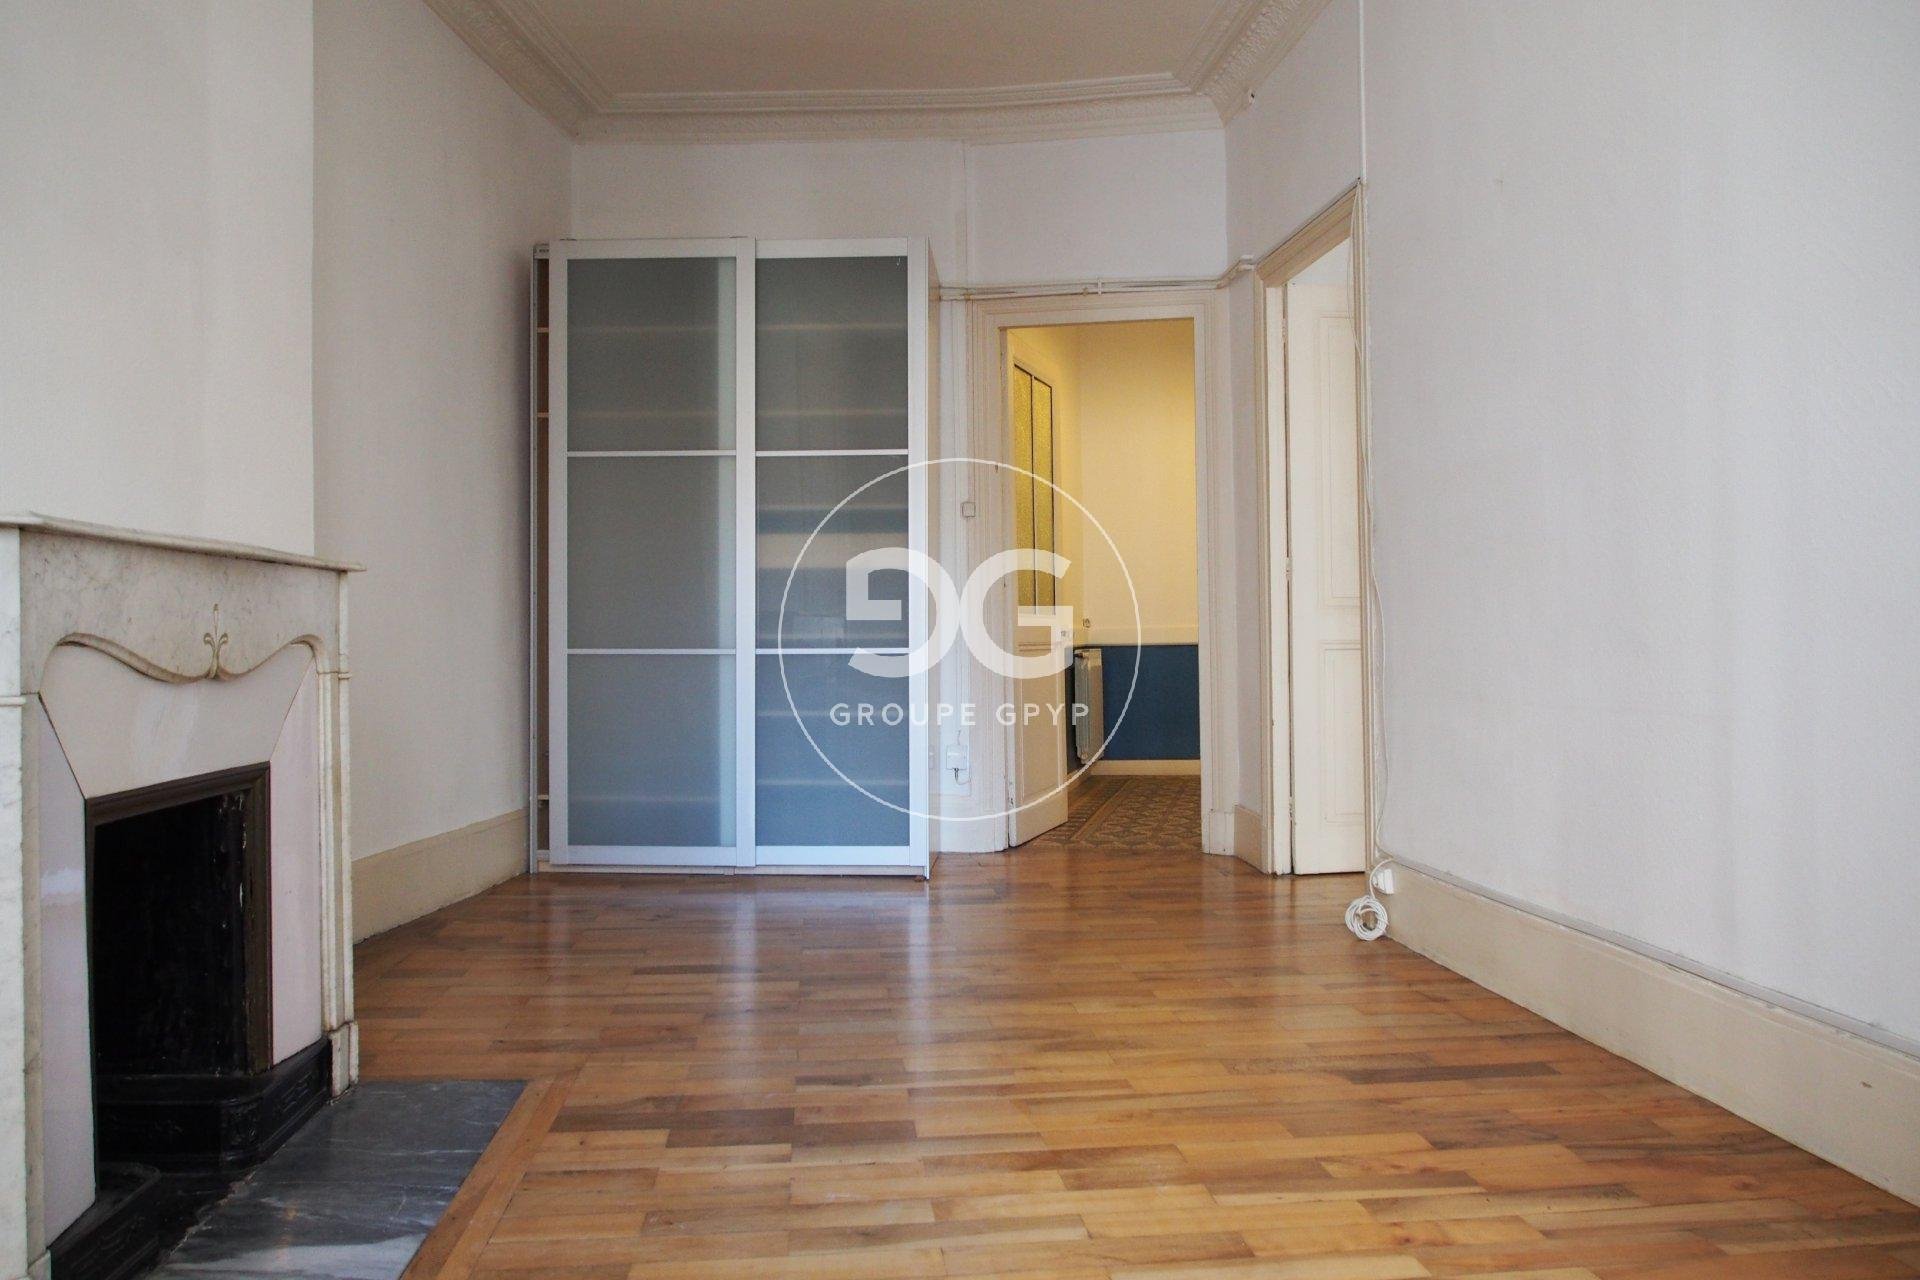 Large 60.11m², one bedroom apartment in central Grenoble